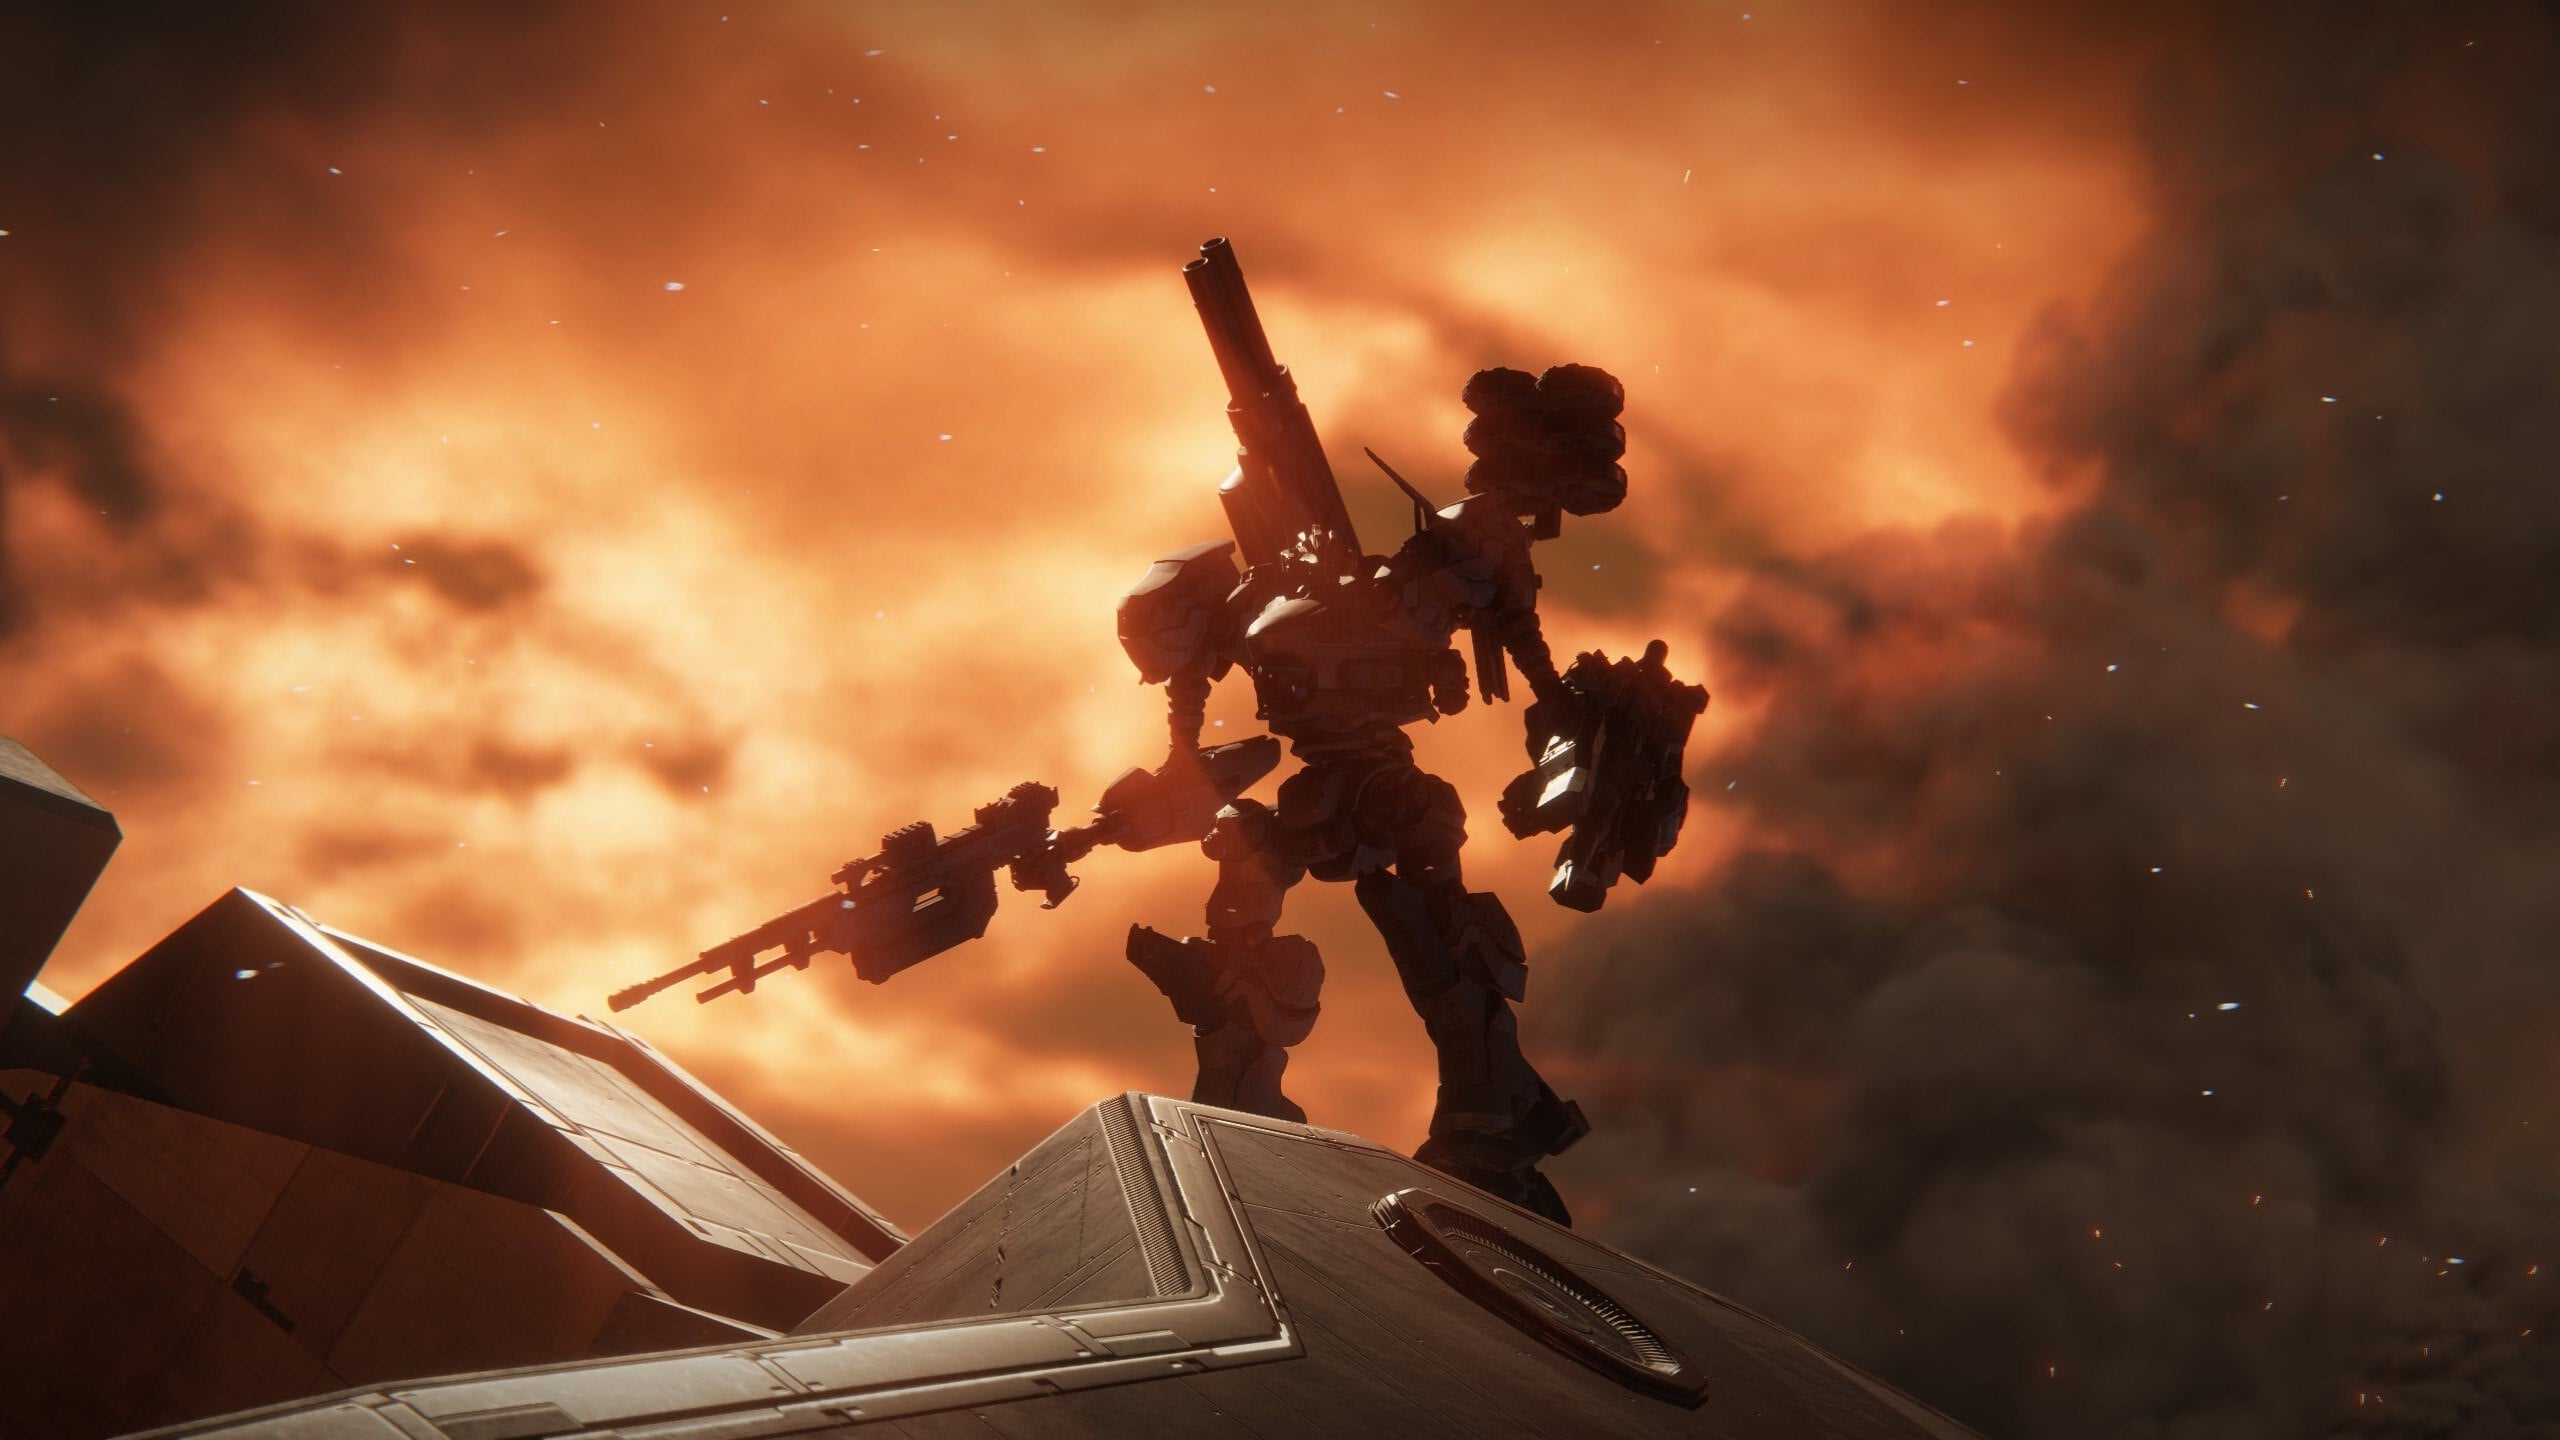 5 hardest Armored Core 6 Bosses, Ranked - News